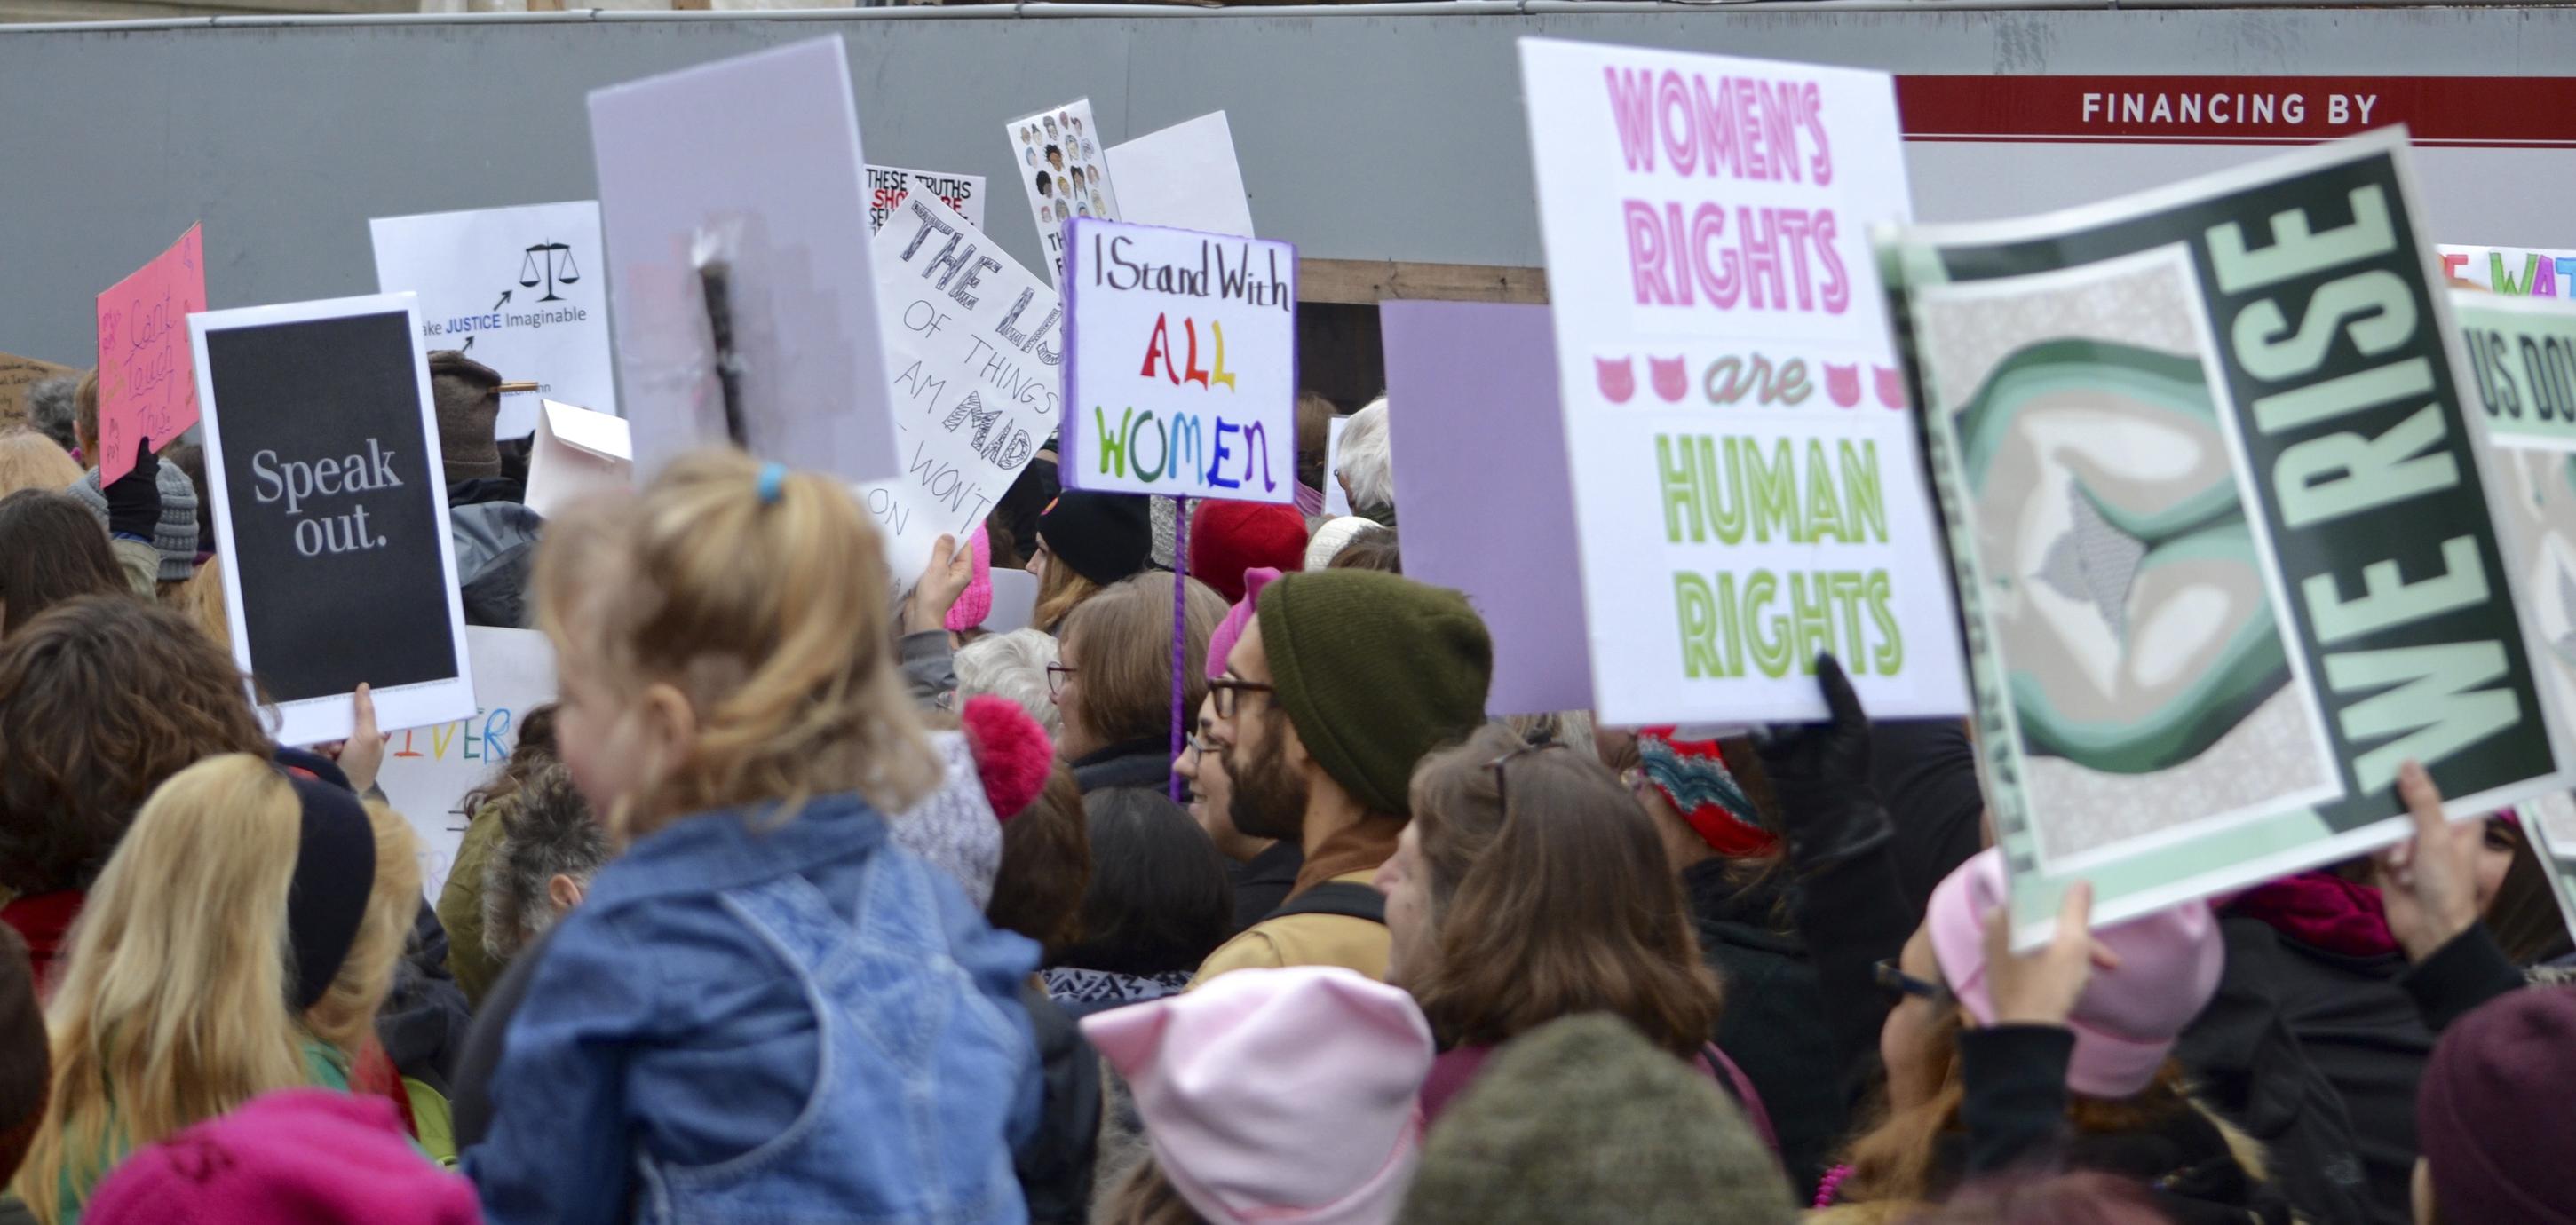 Women’s Rights Are Human Rights